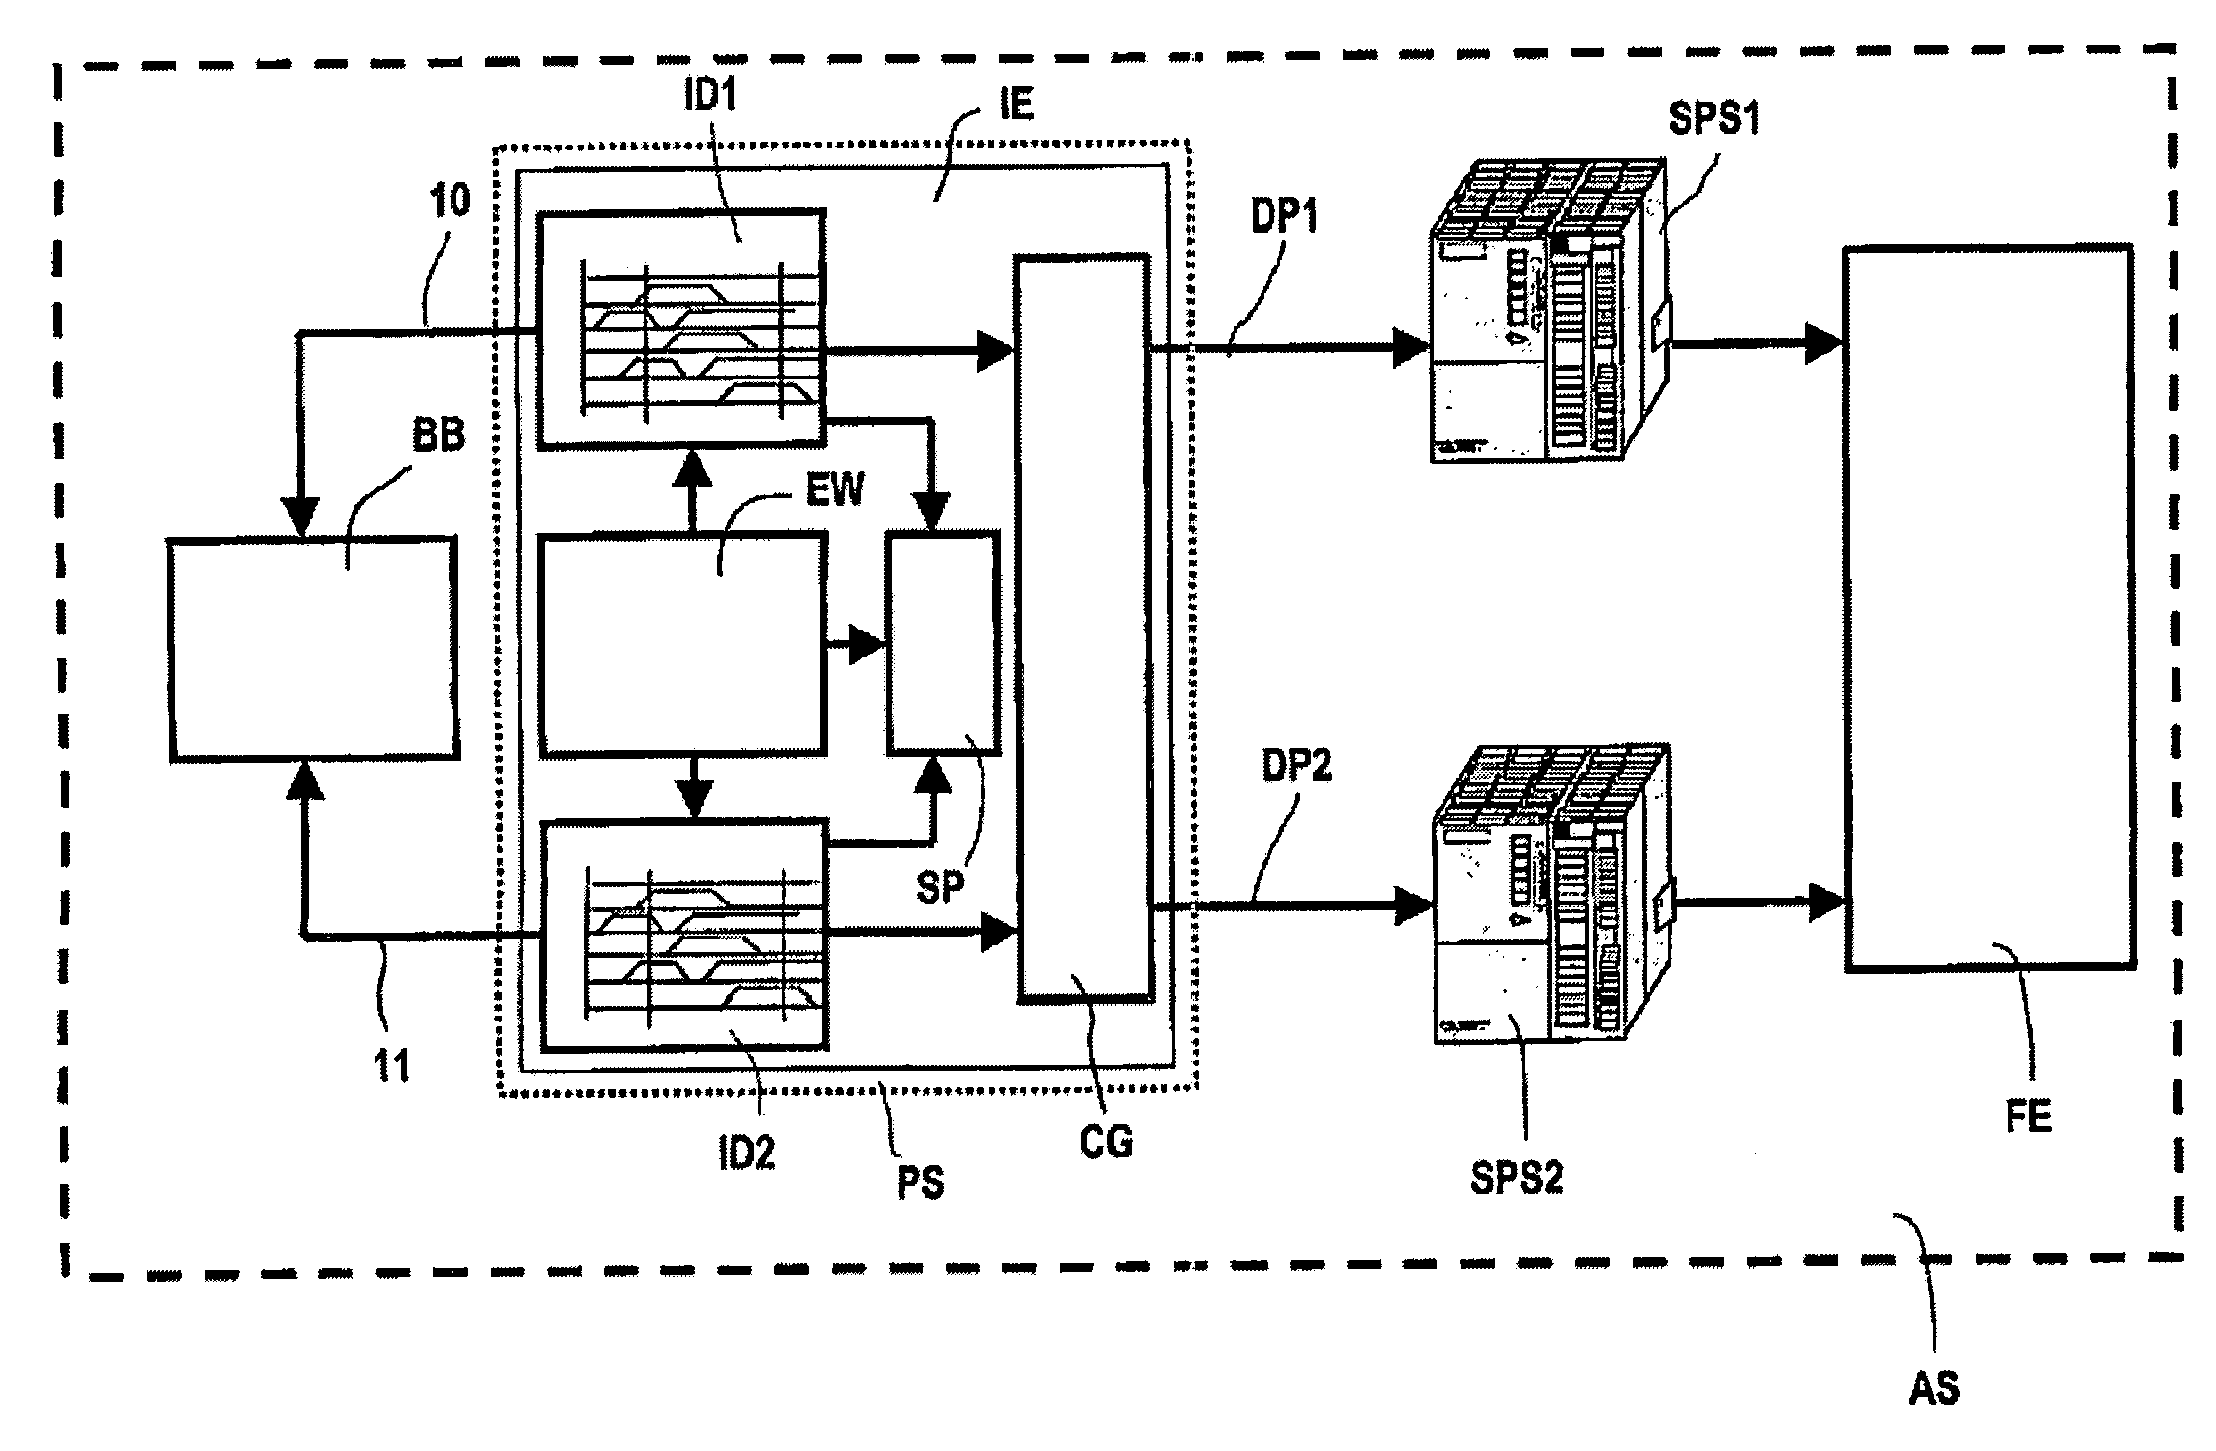 System and method for programming an automation system, based on pulse timing diagrams